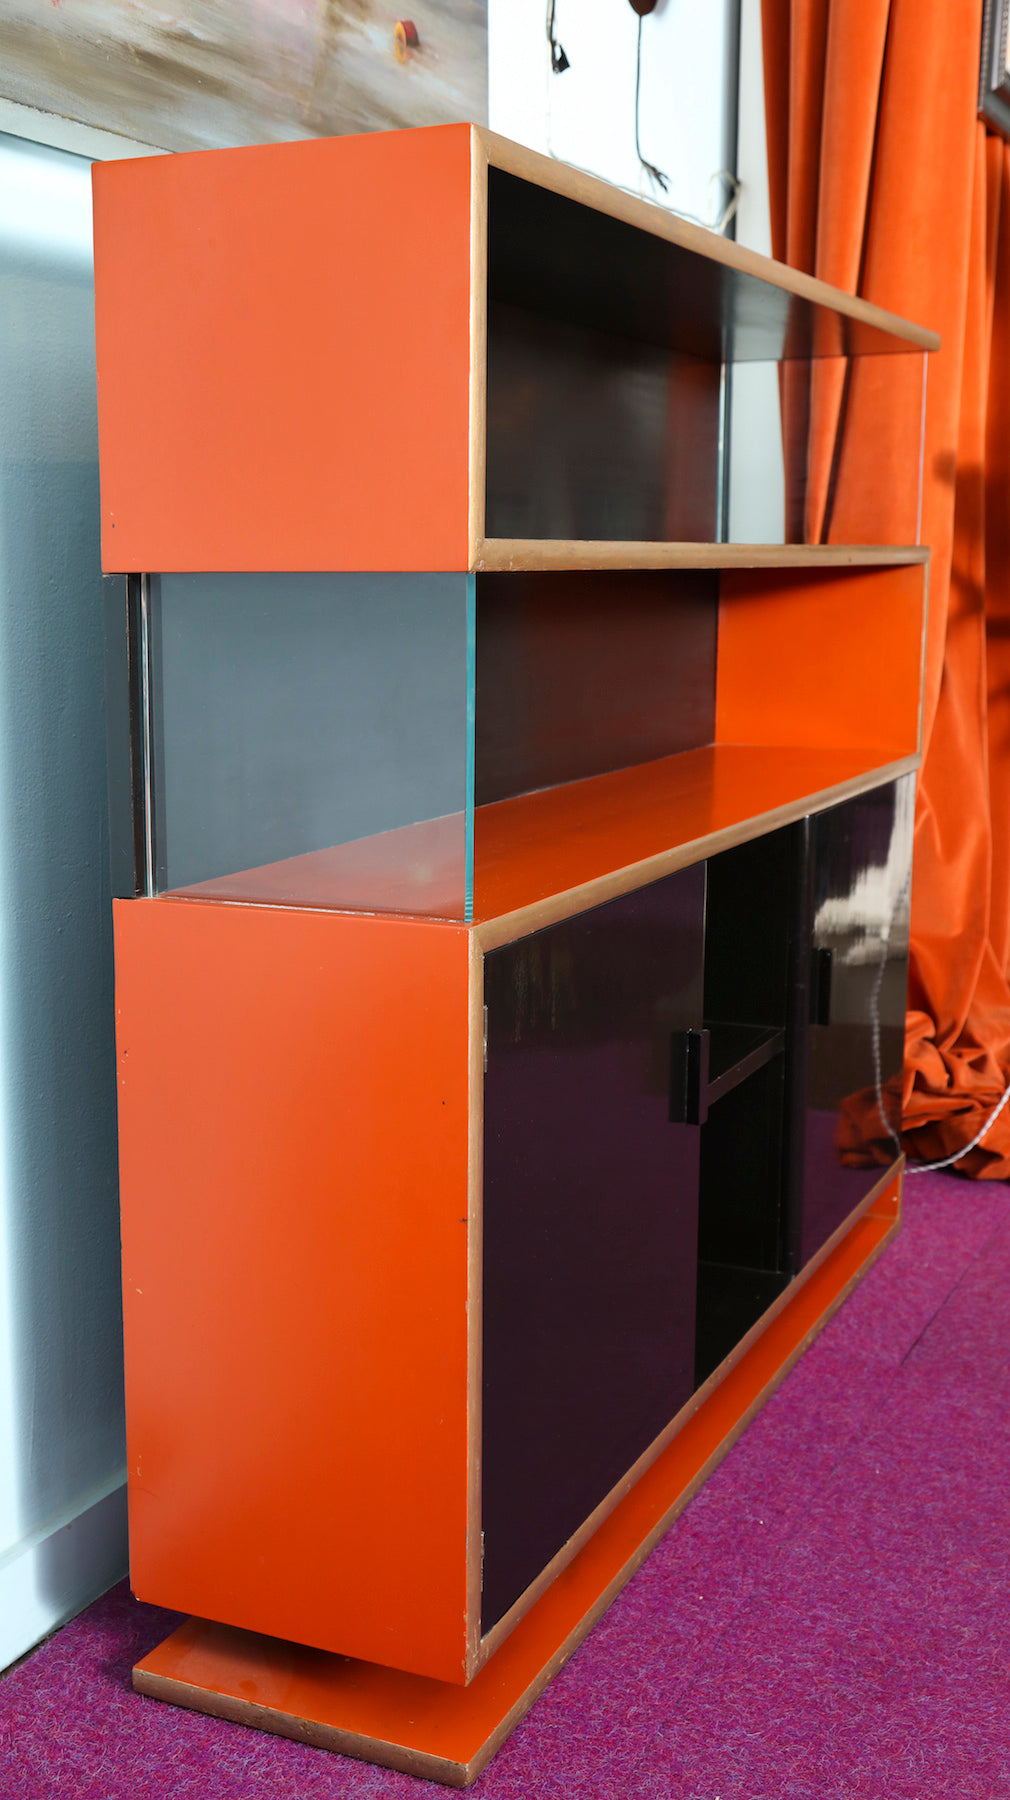 RARE CUSTOM BOOKCASE BY PAUL FRANKL